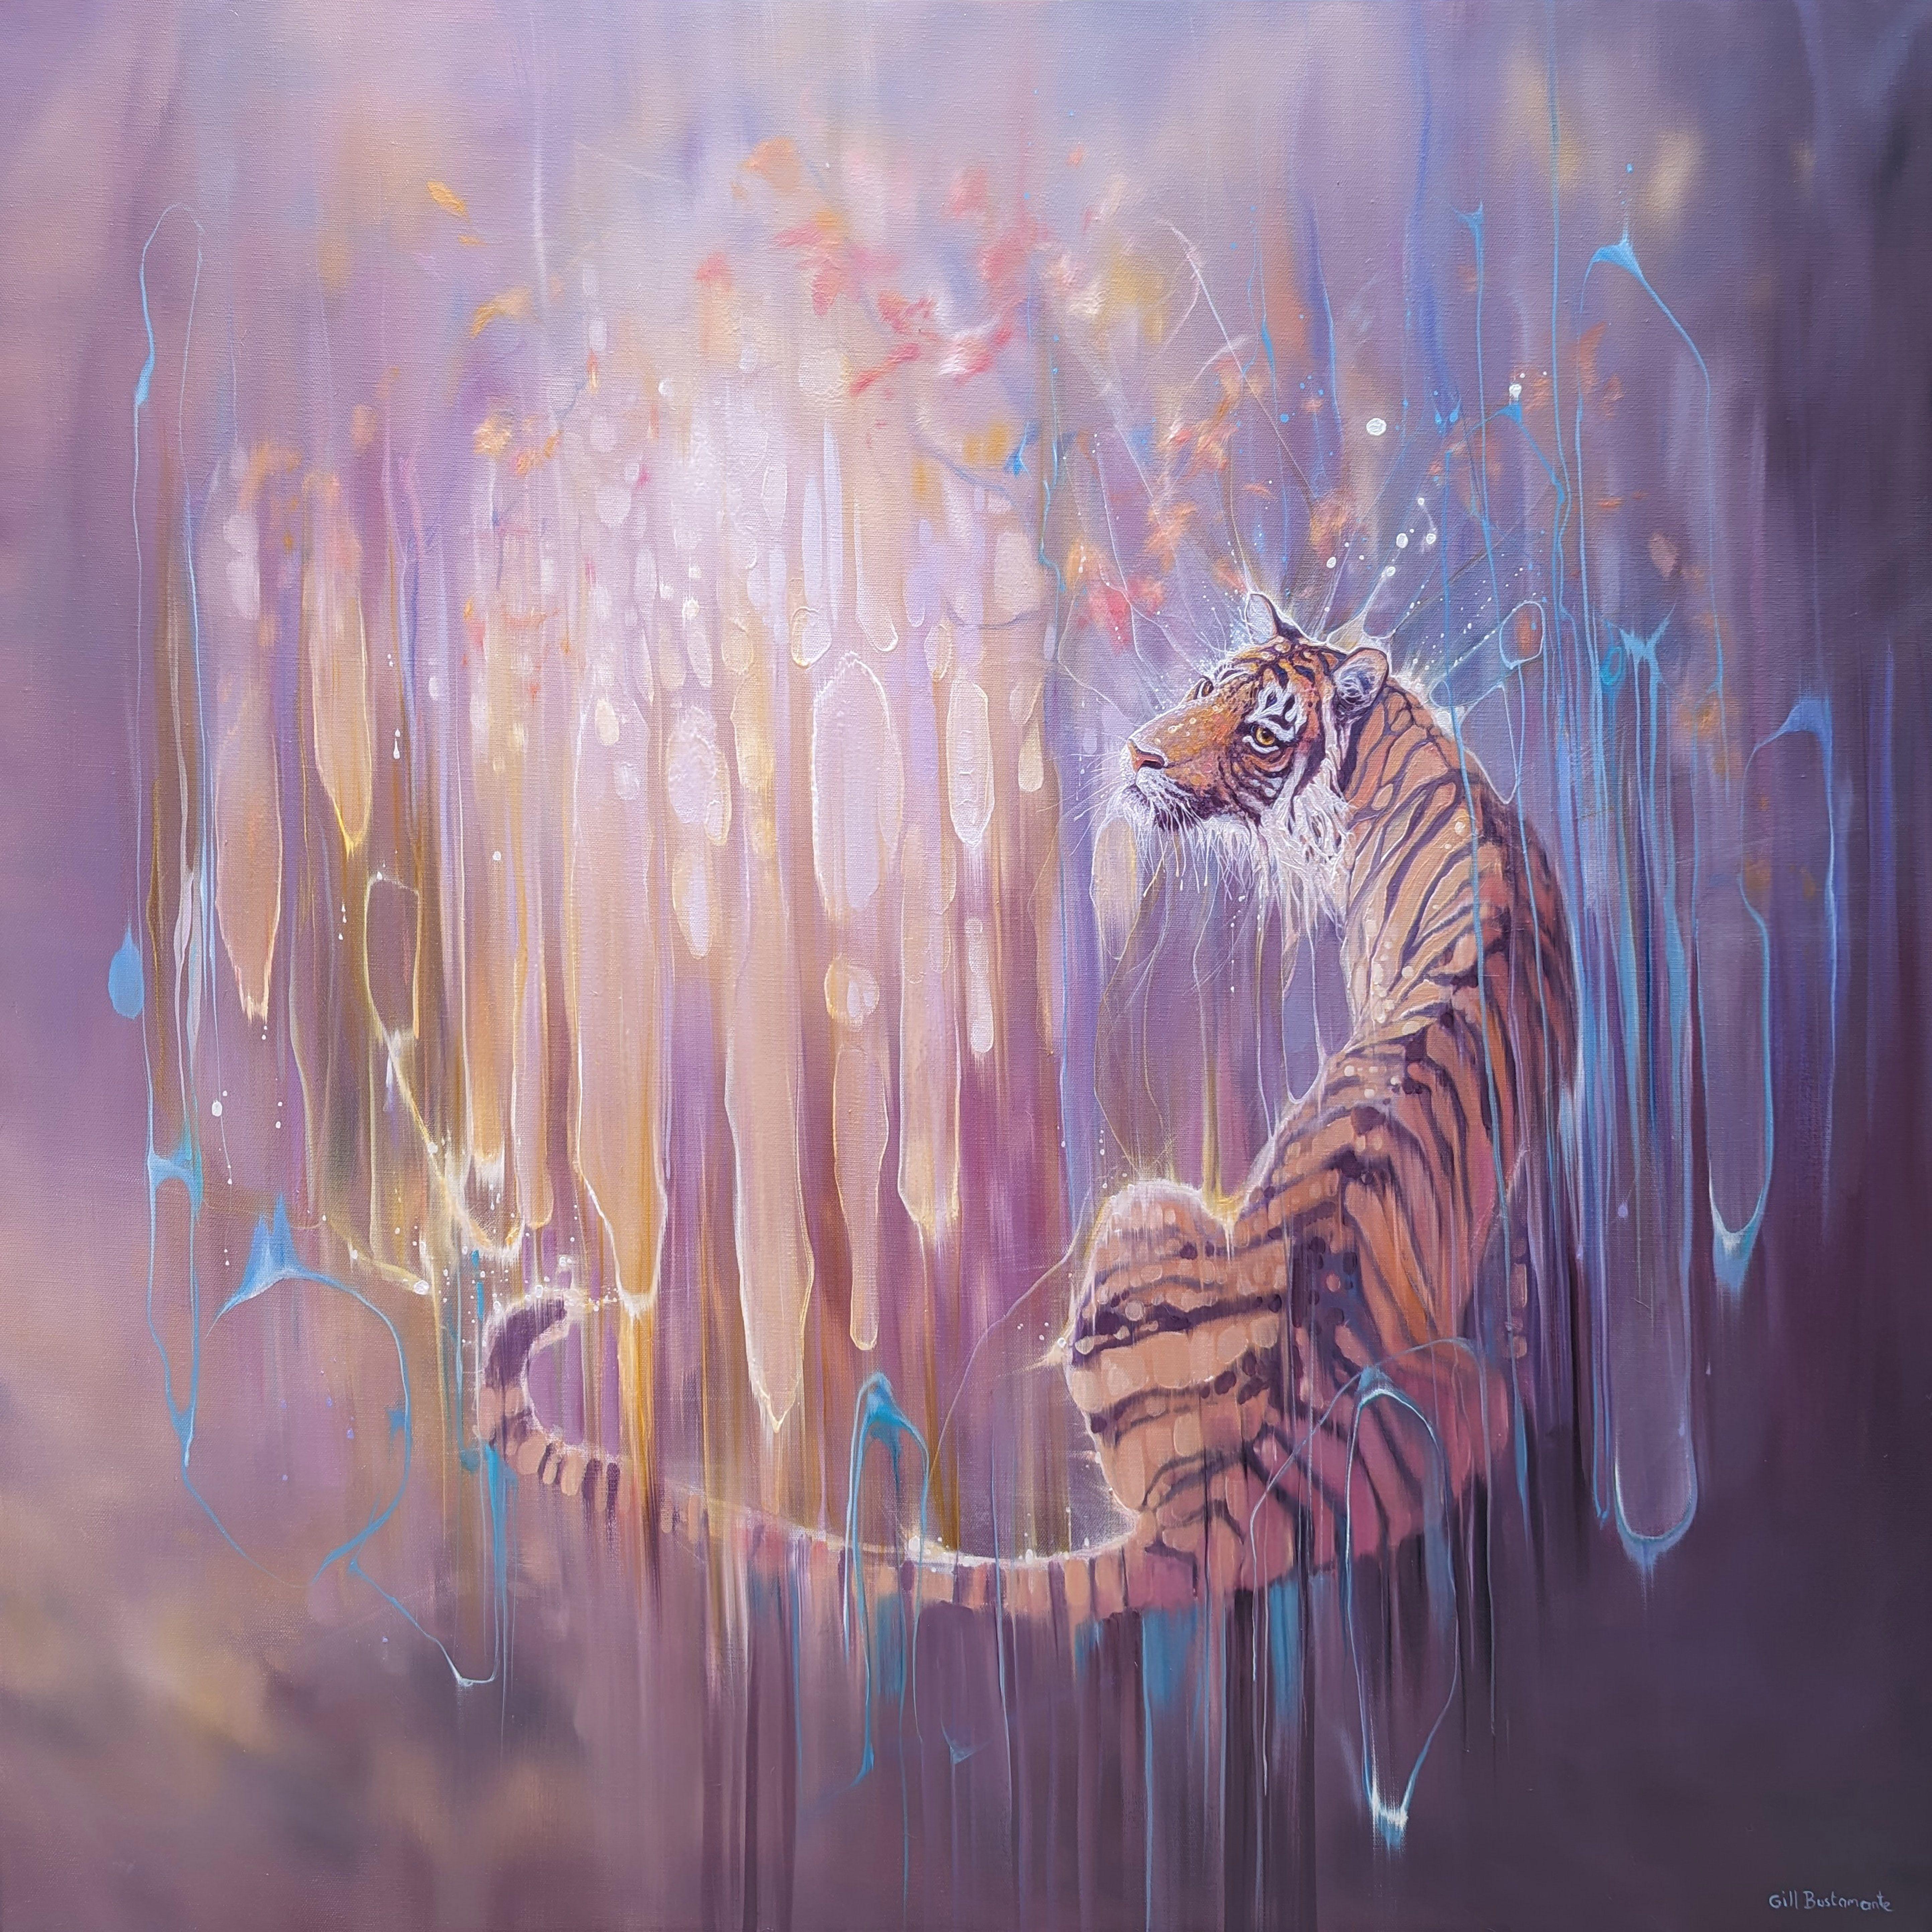 Tiger in the Ether is a 40x40x1.5 inches purple oil painting of a semi-abstract art-nouveau style tiger against an abstract background. The style is slightly art nouveau and makes use of the complementary colours of purple with yellow and orange